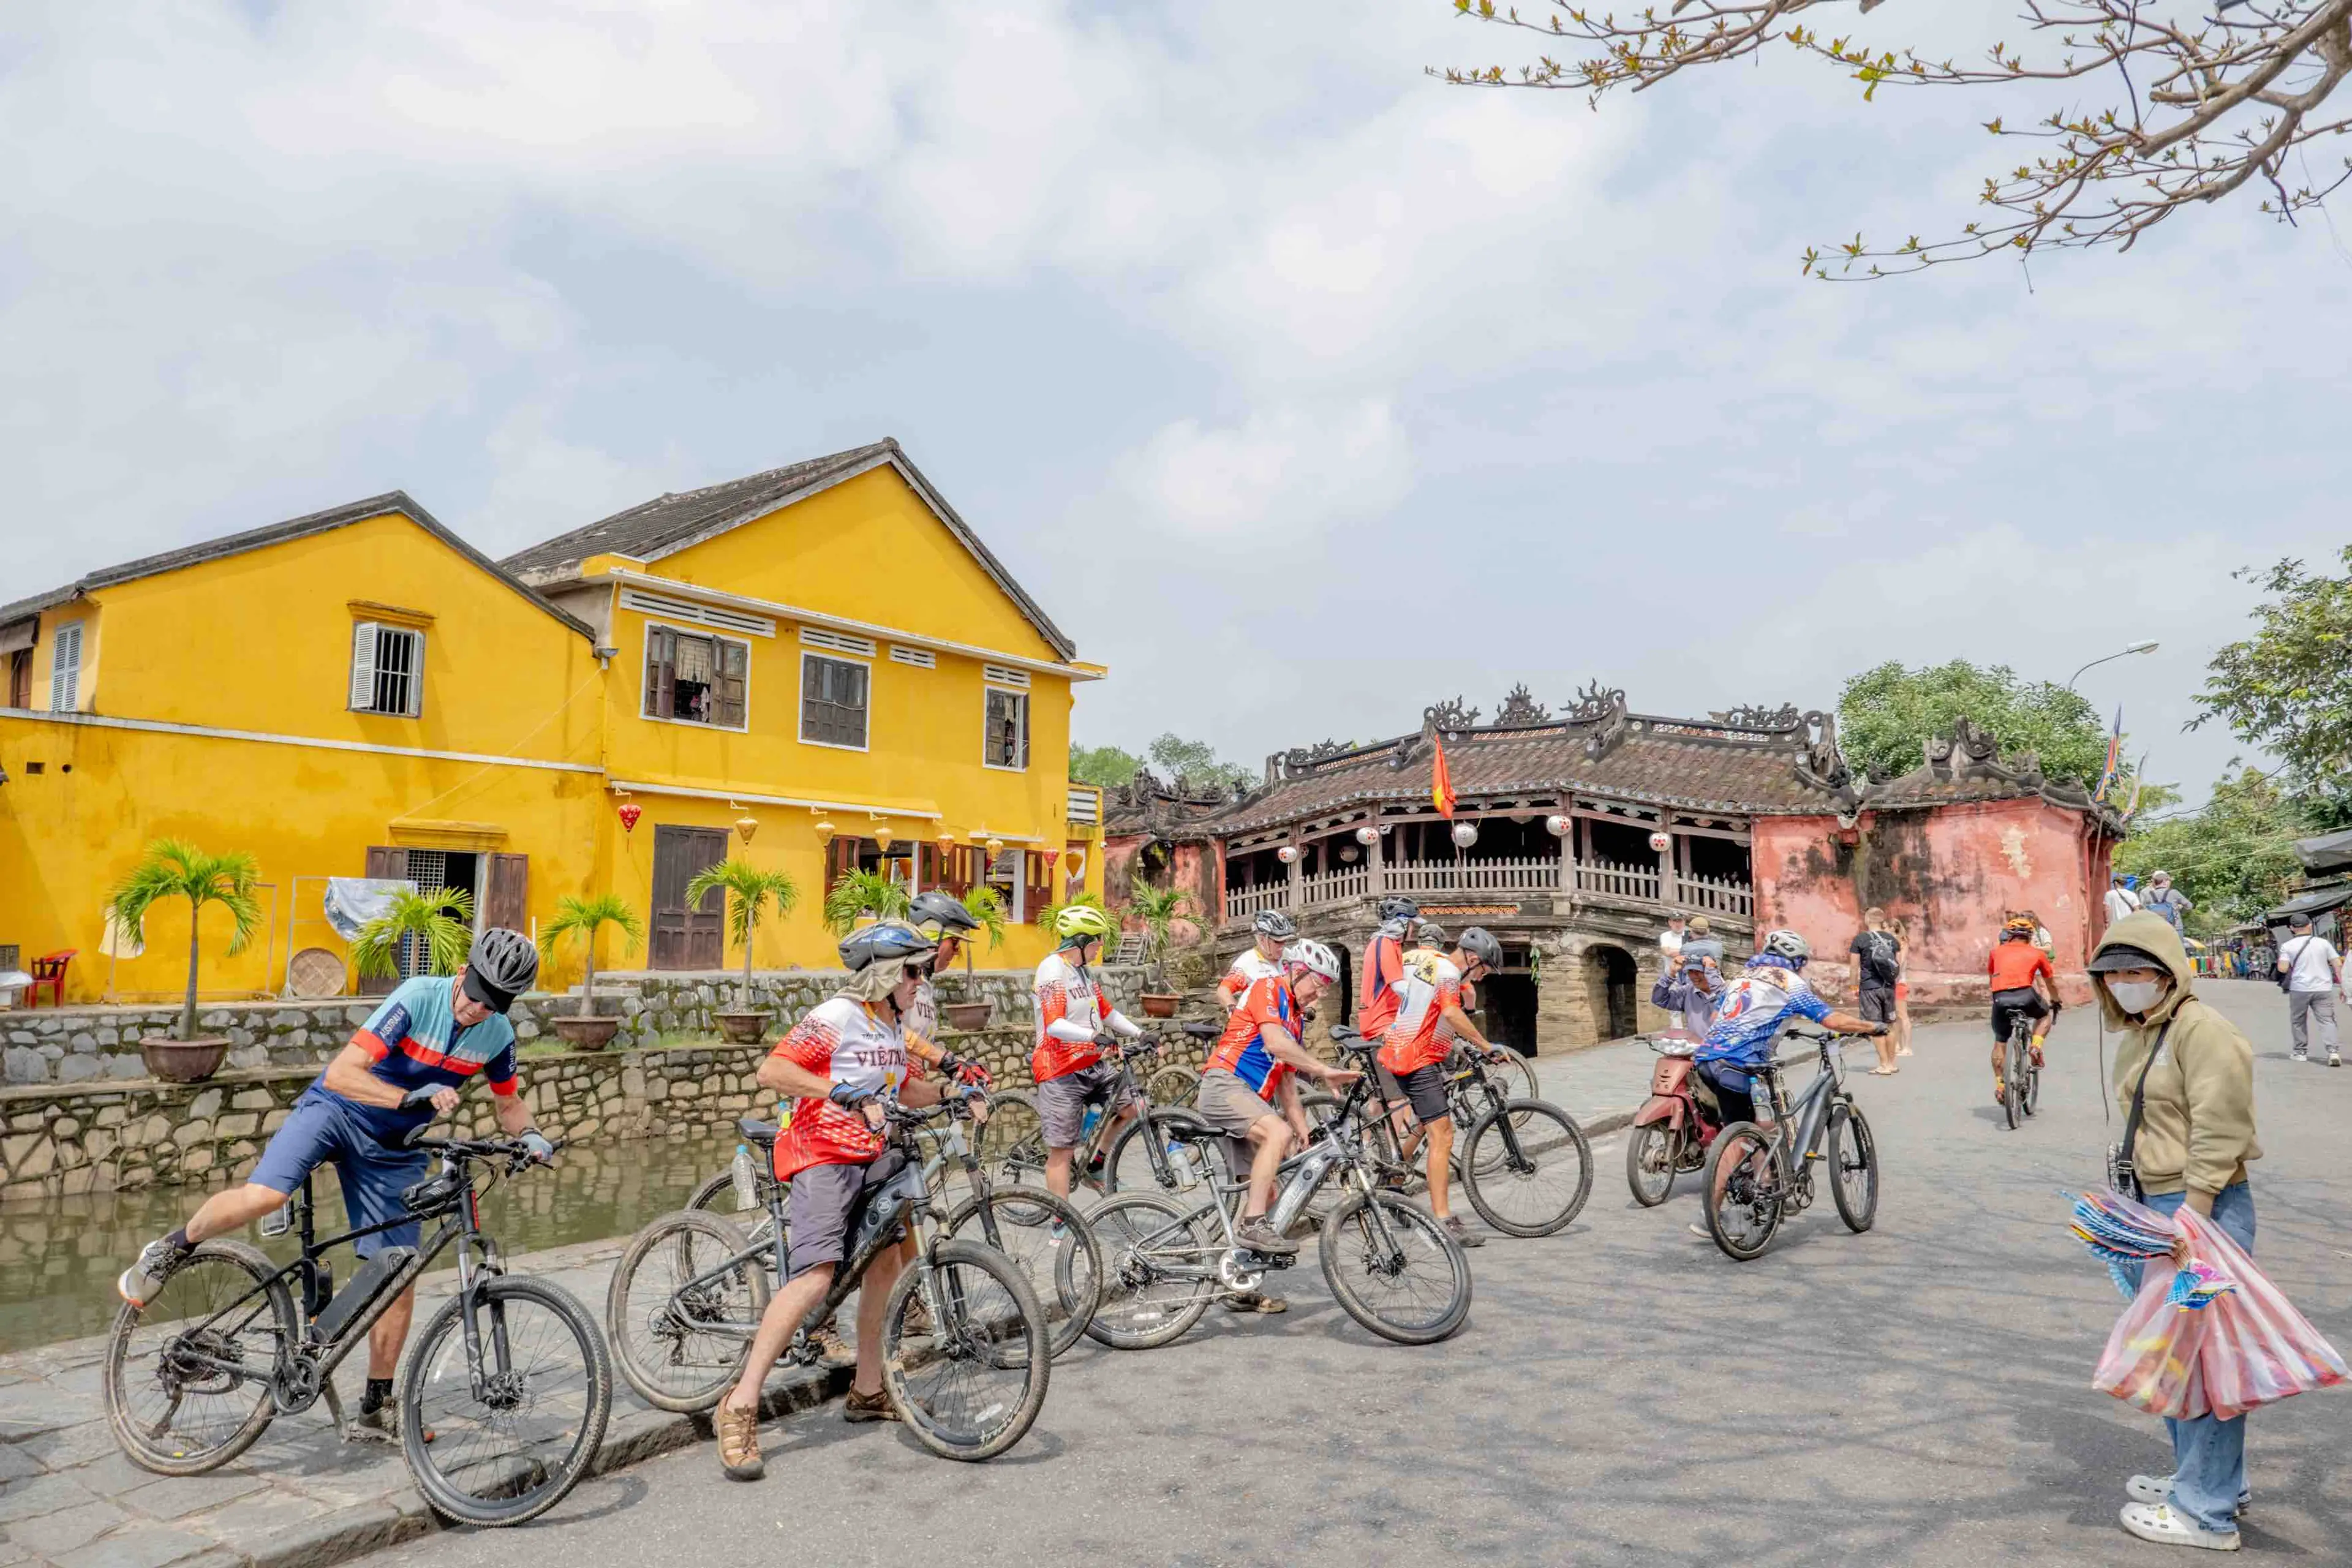 Mr Biker Saigon, Hoi An Is A Great Destination Of Cycling And Cultural Exploration